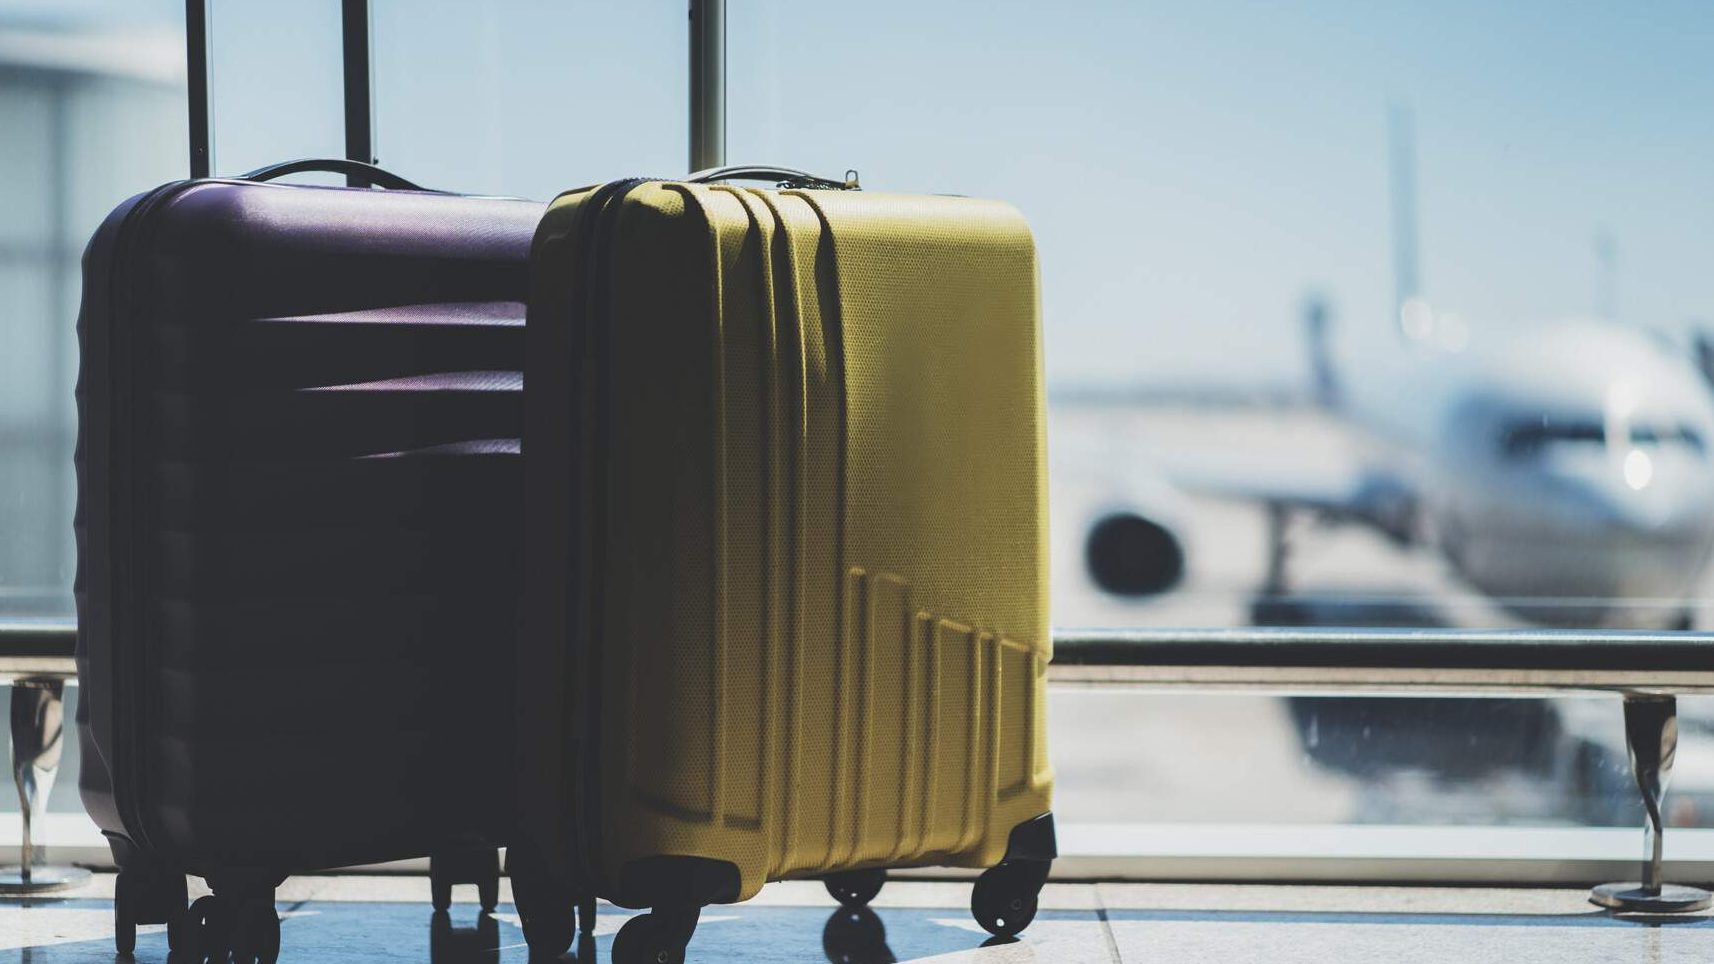 Travel right: Carry-on luggage size and weight guide